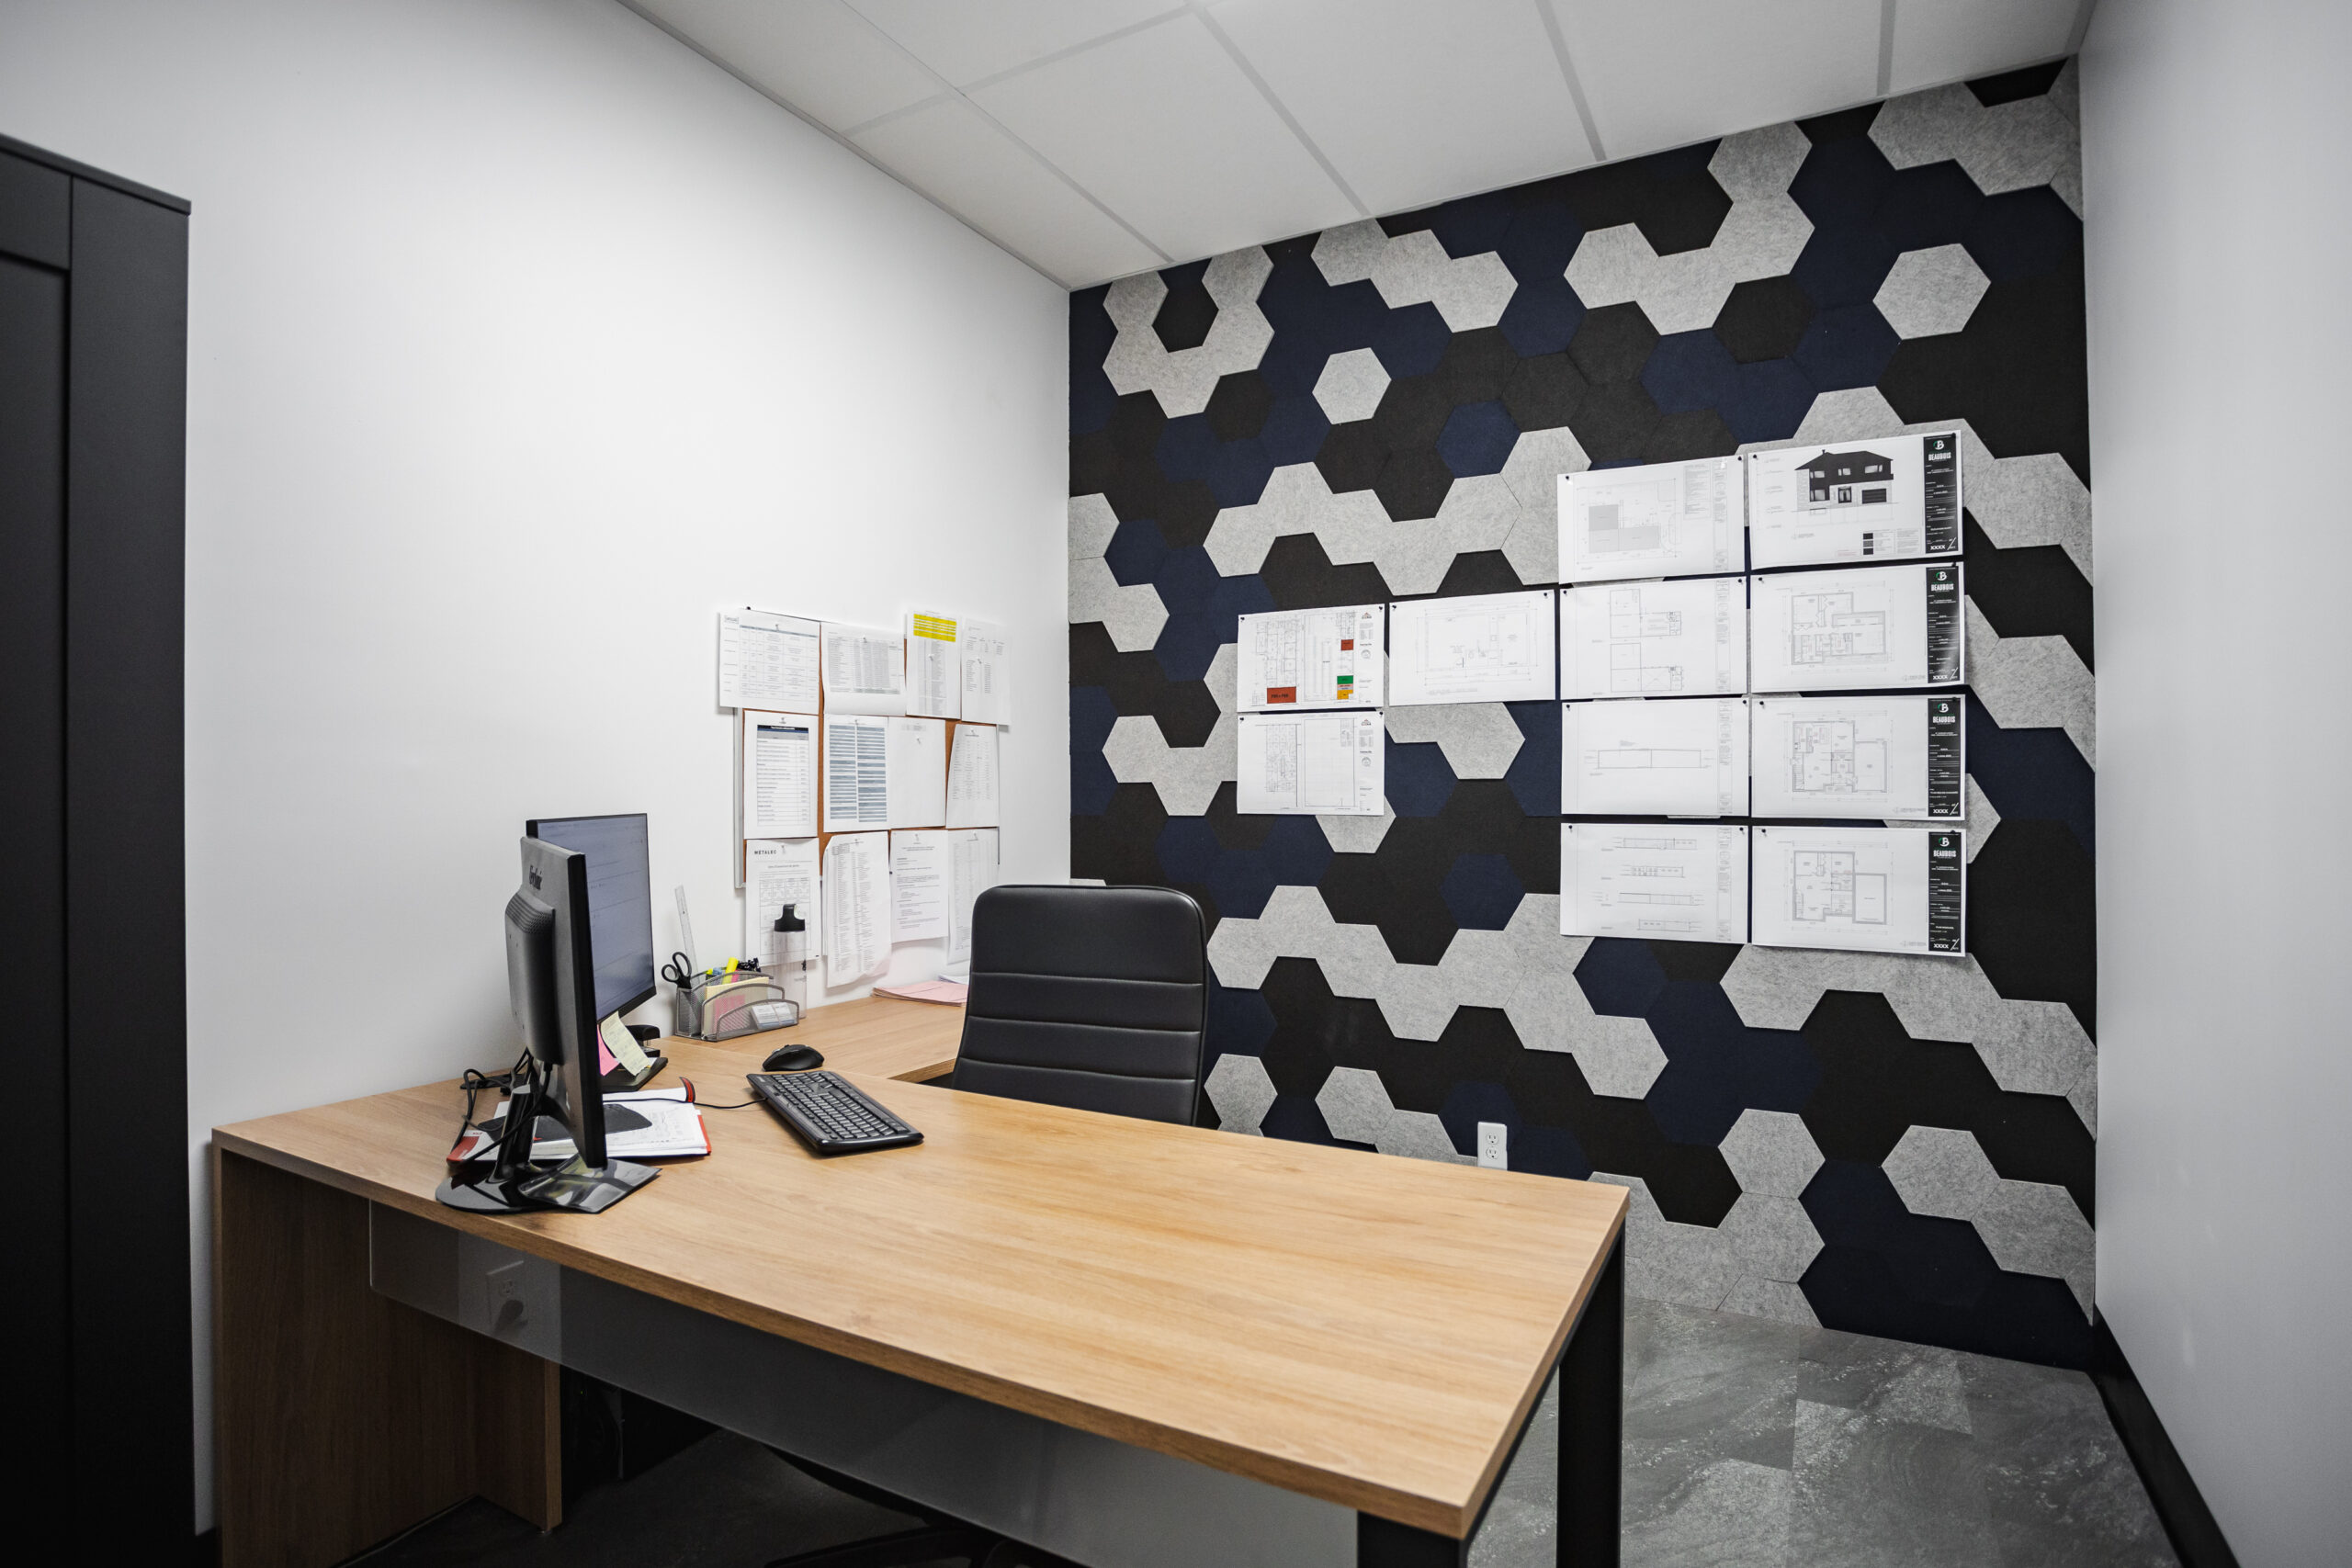 Acoustical wall tiles